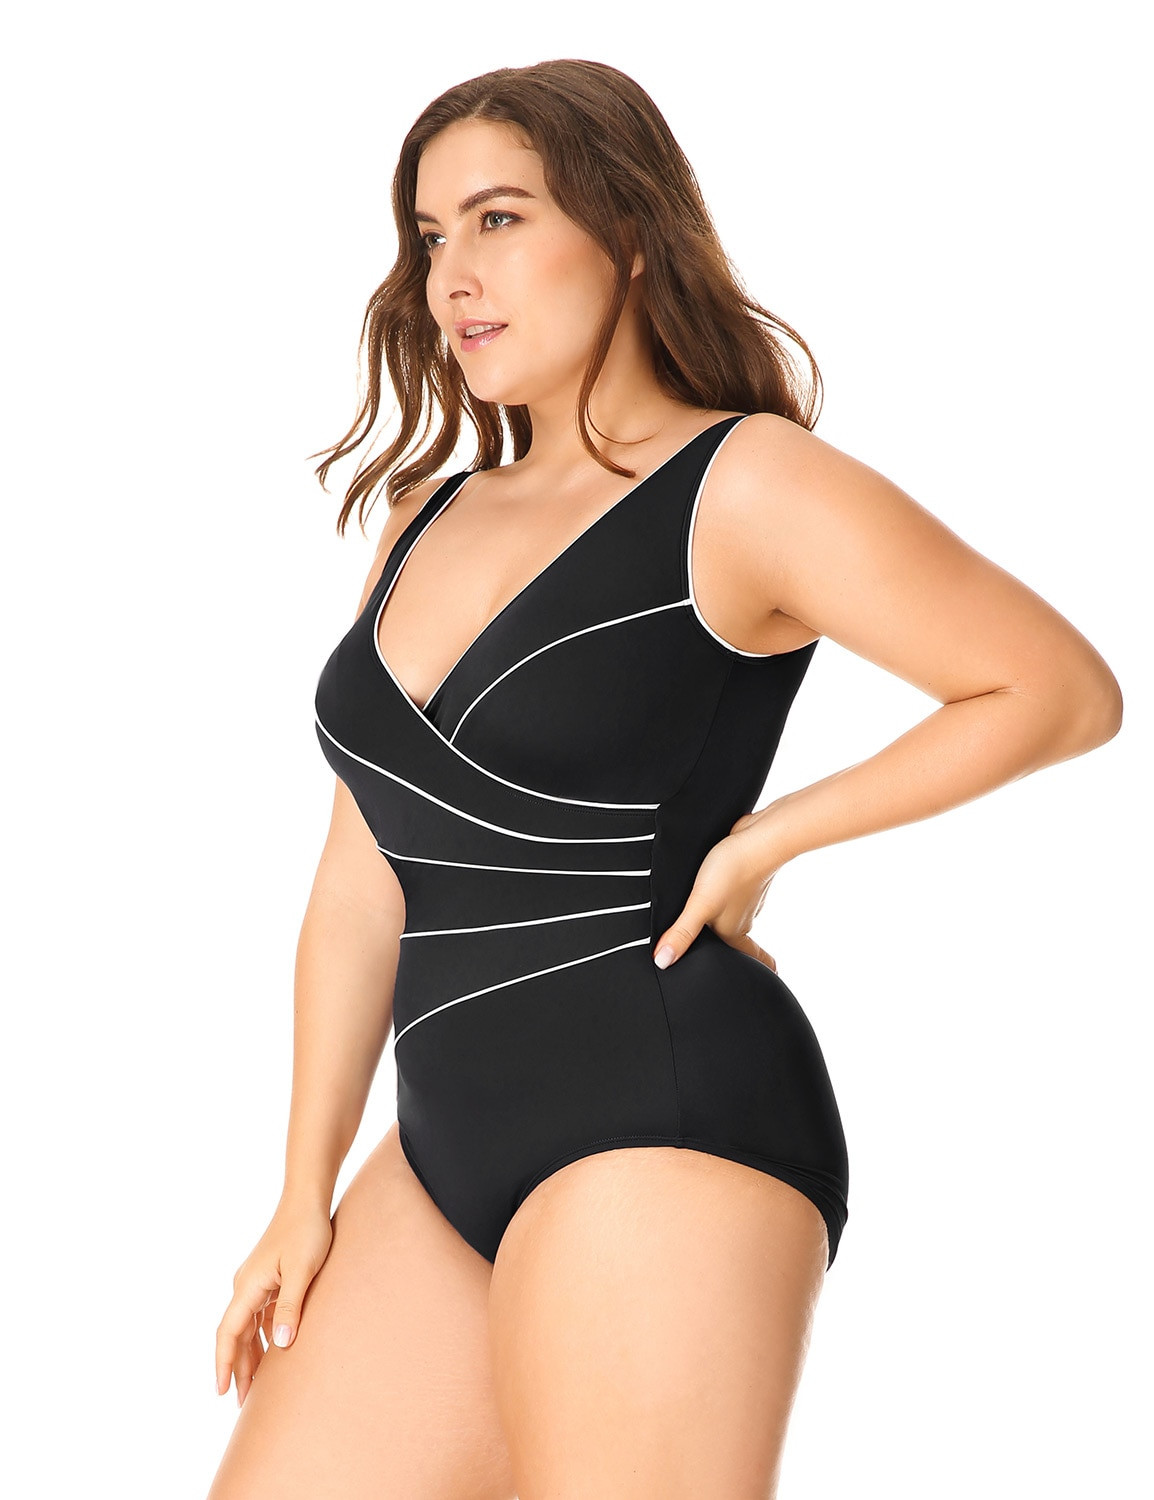 Body Jewelry Bathing Suit
 Delimira Women s Slimming e Piece Piped Plus Size